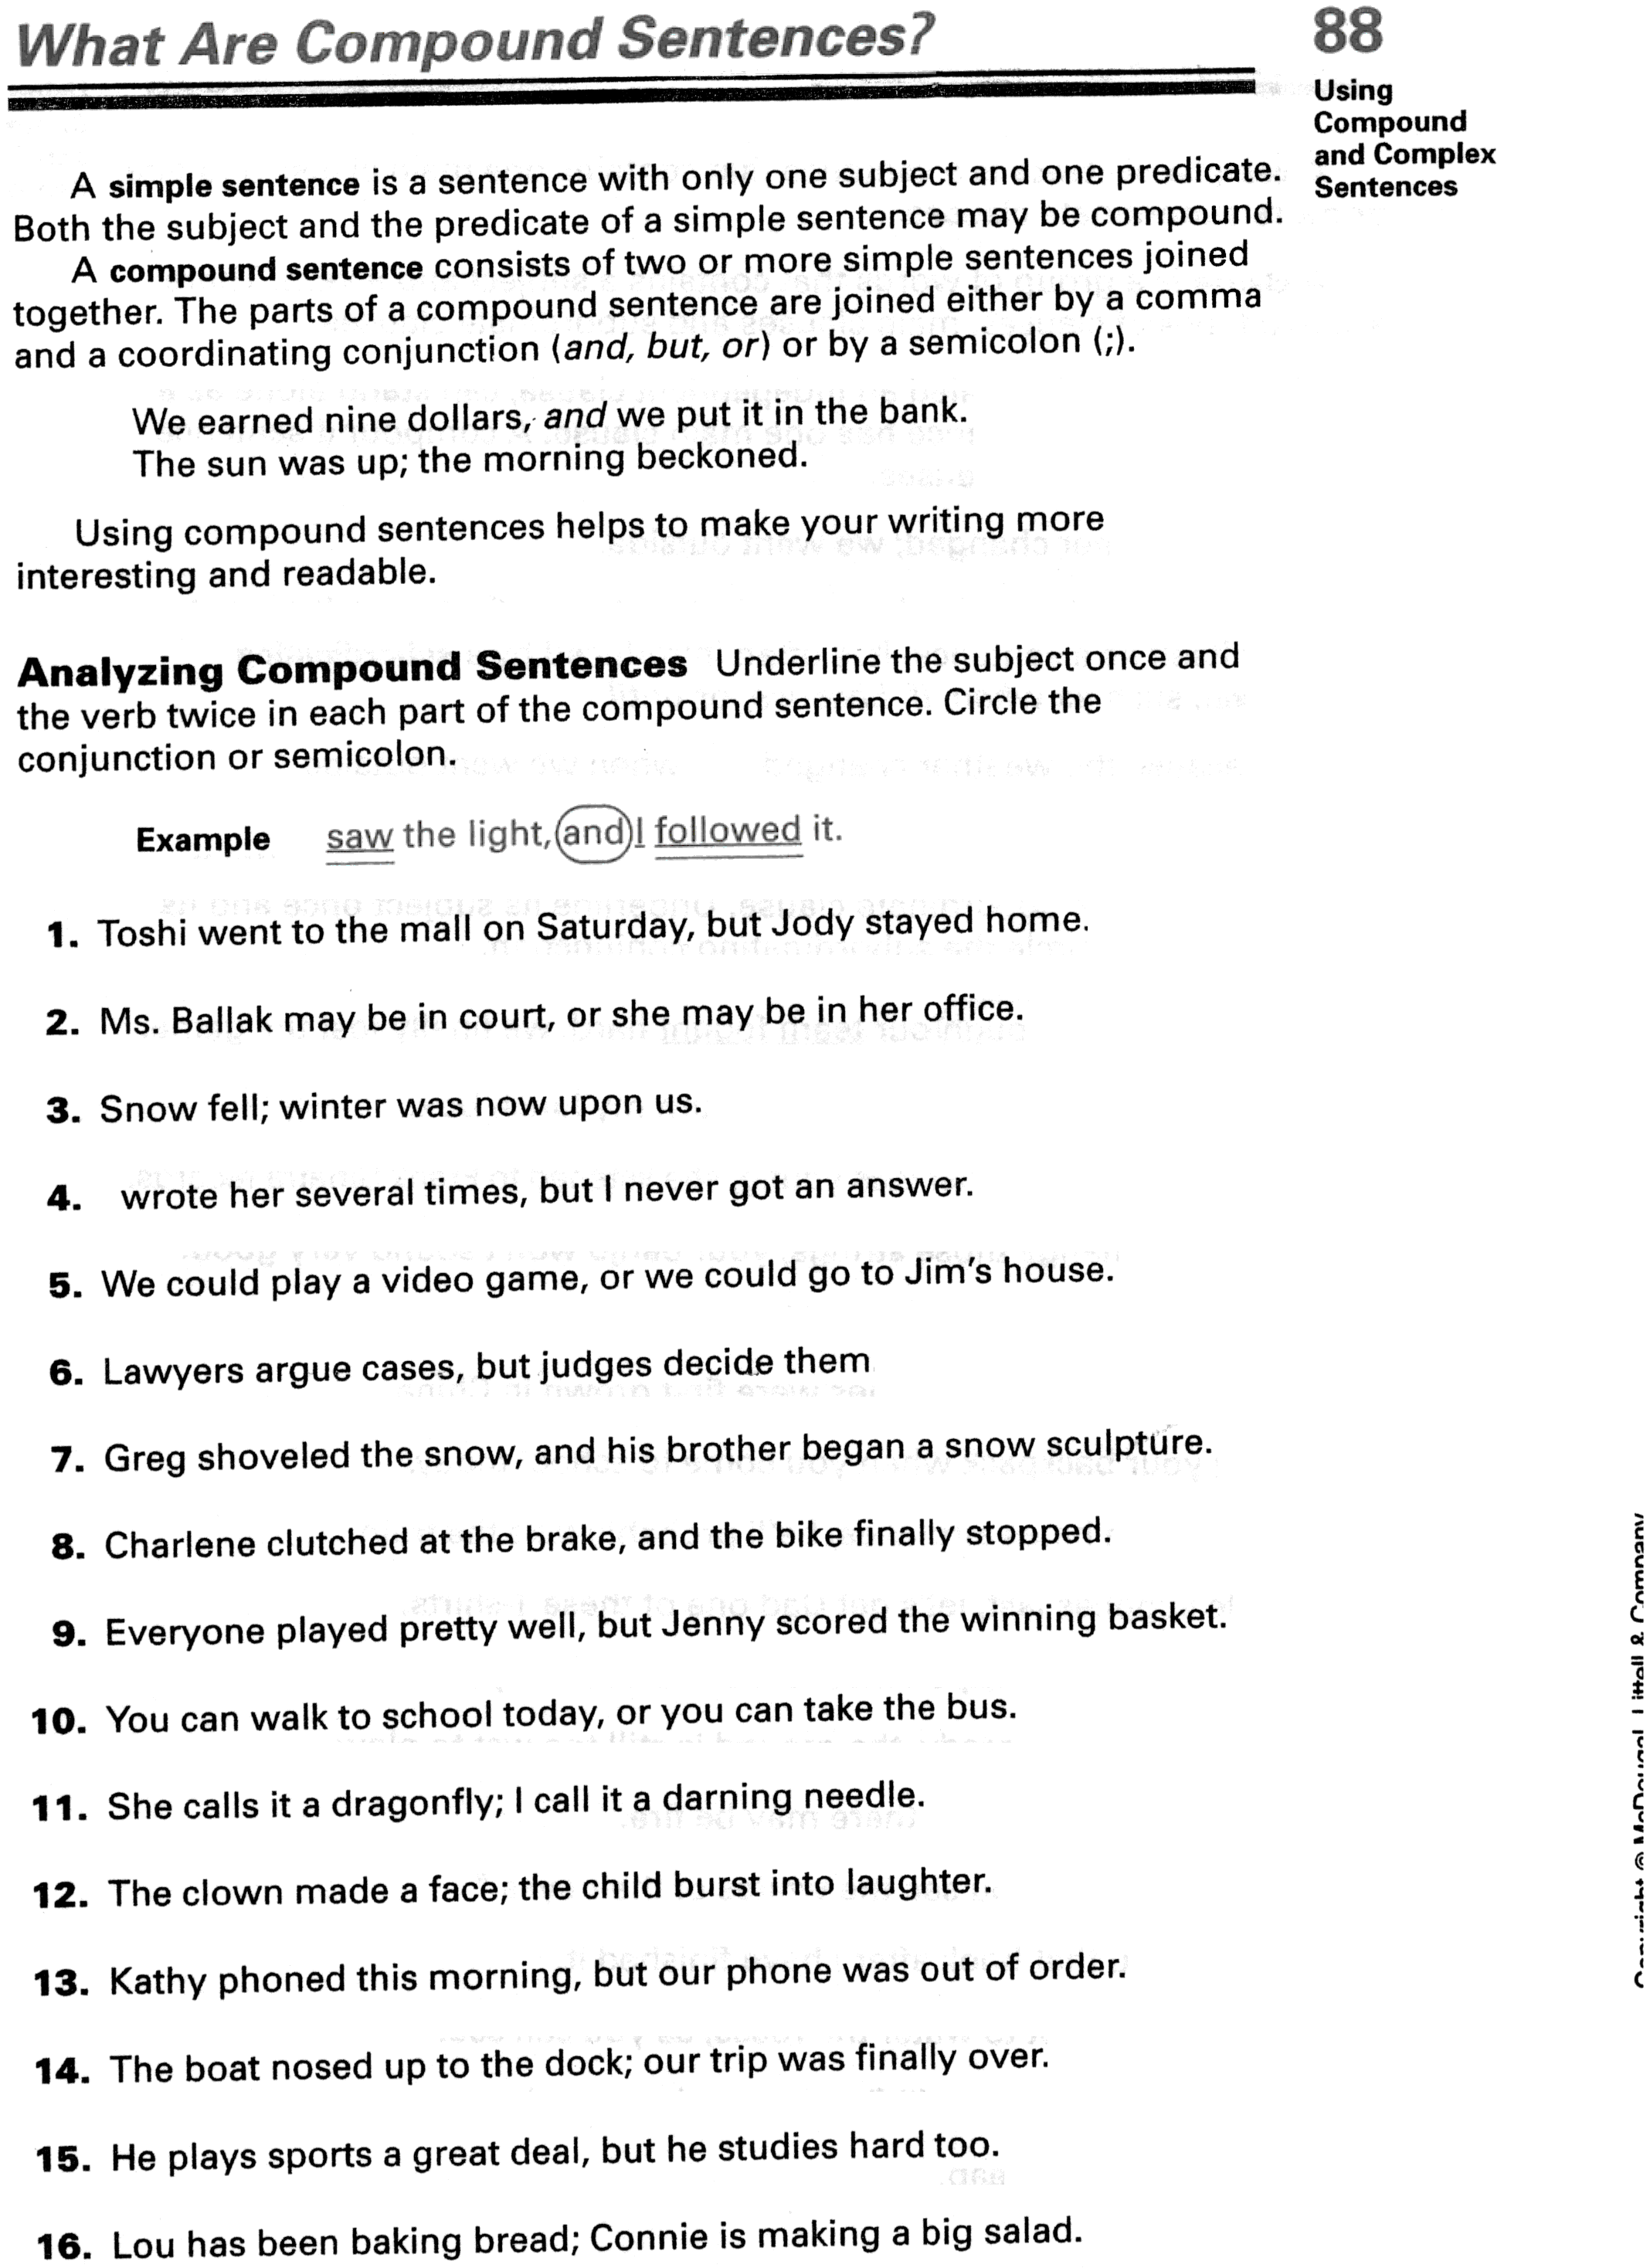 15 Best Images Of Simple Compound Complex Sentences Worksheets Compound Complex Sentence